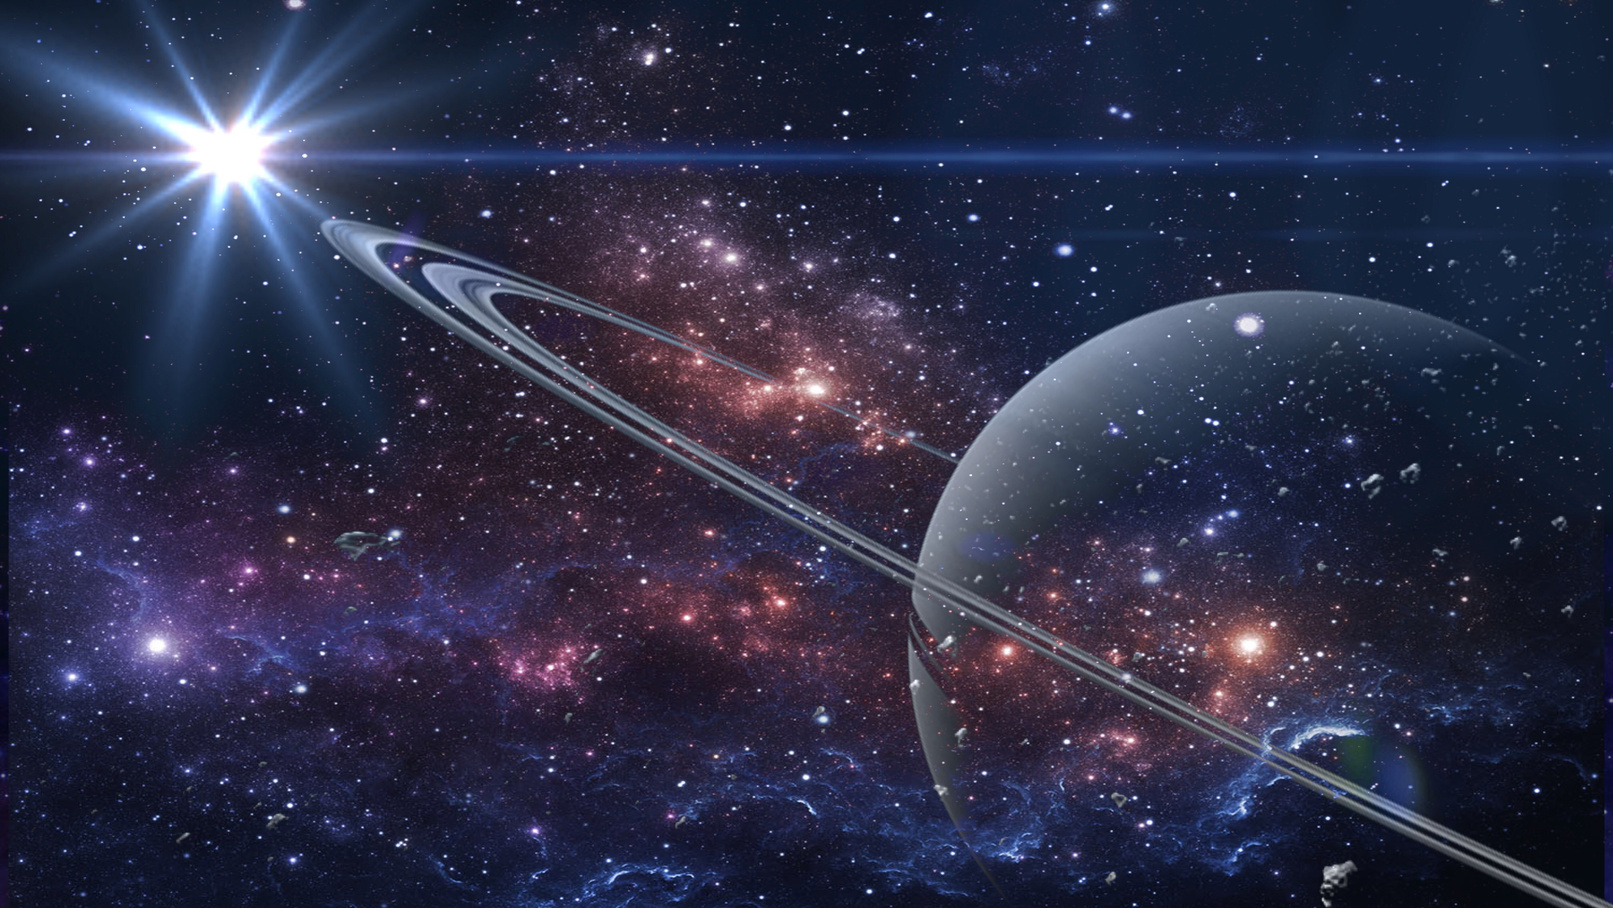 Planets and galaxy, cosmos,  physical cosmology, science fiction wallpaper.